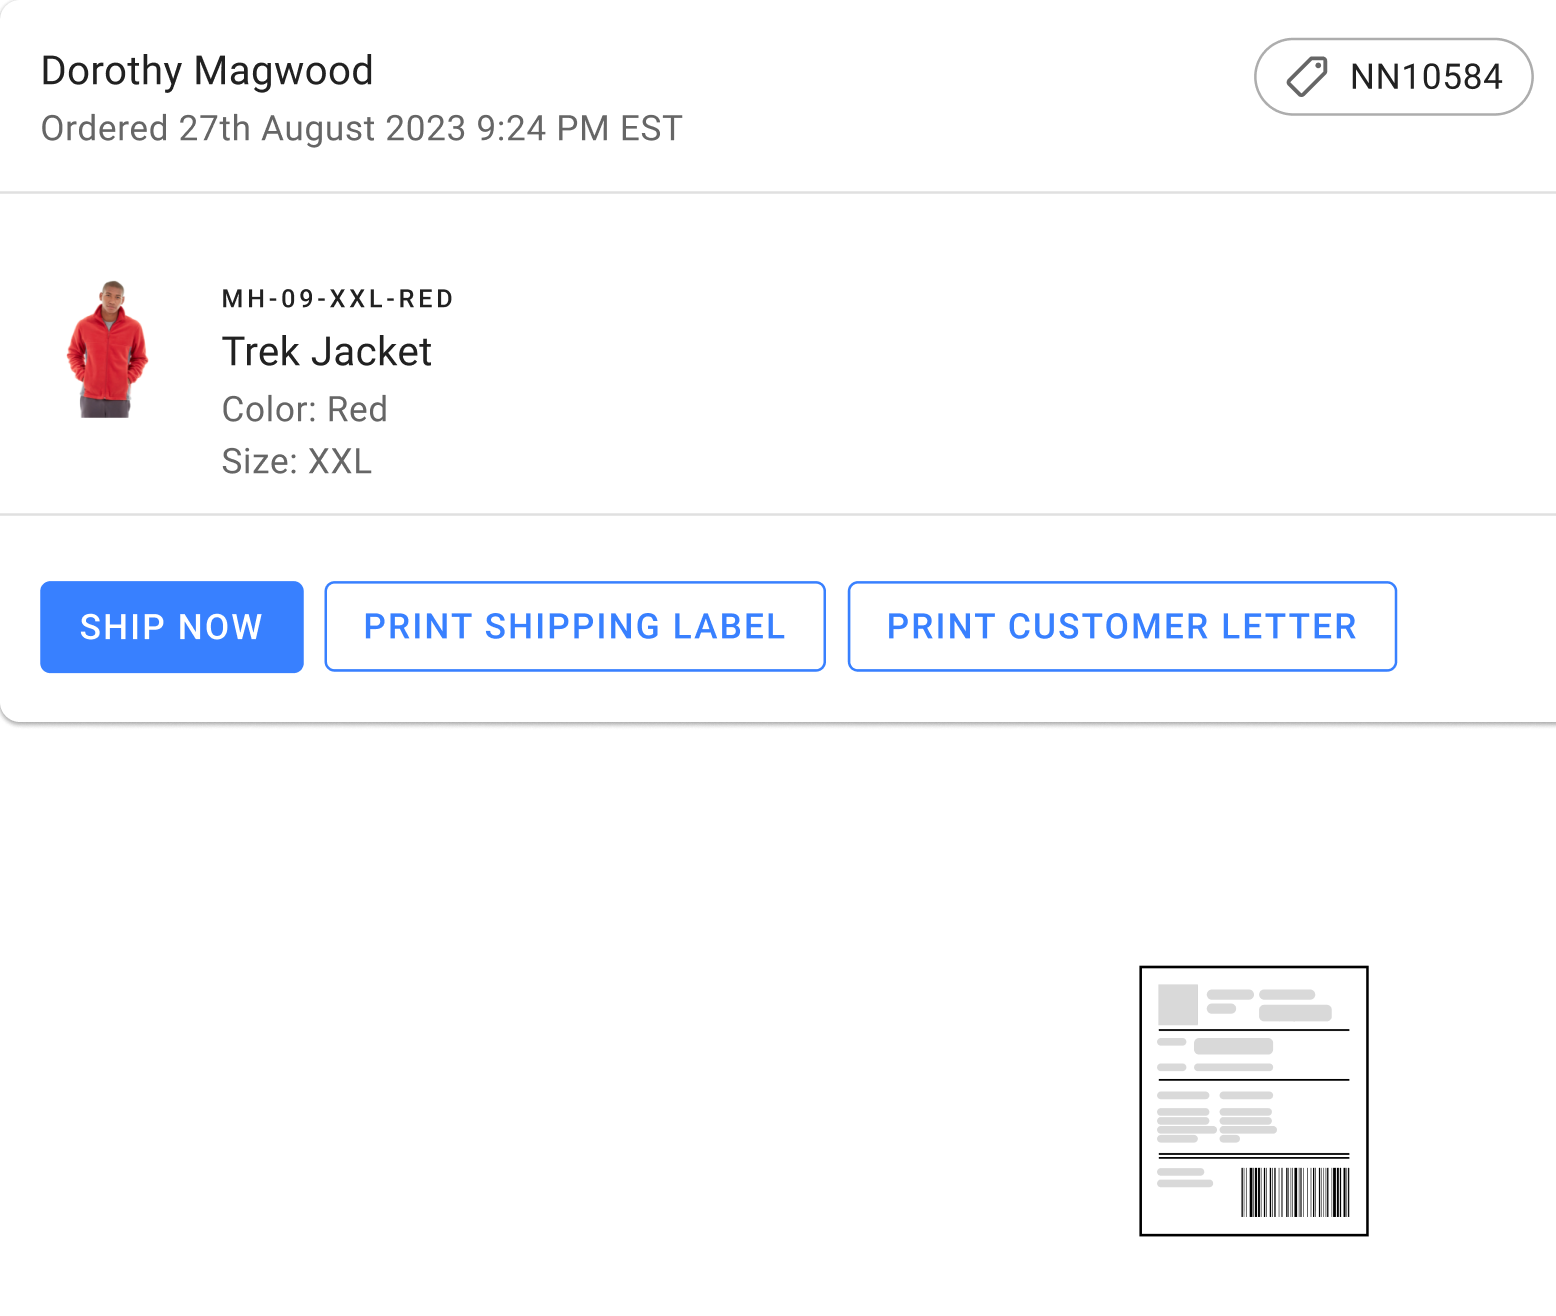 Print Shipping Labels in Bulk and Reduce Packing Time